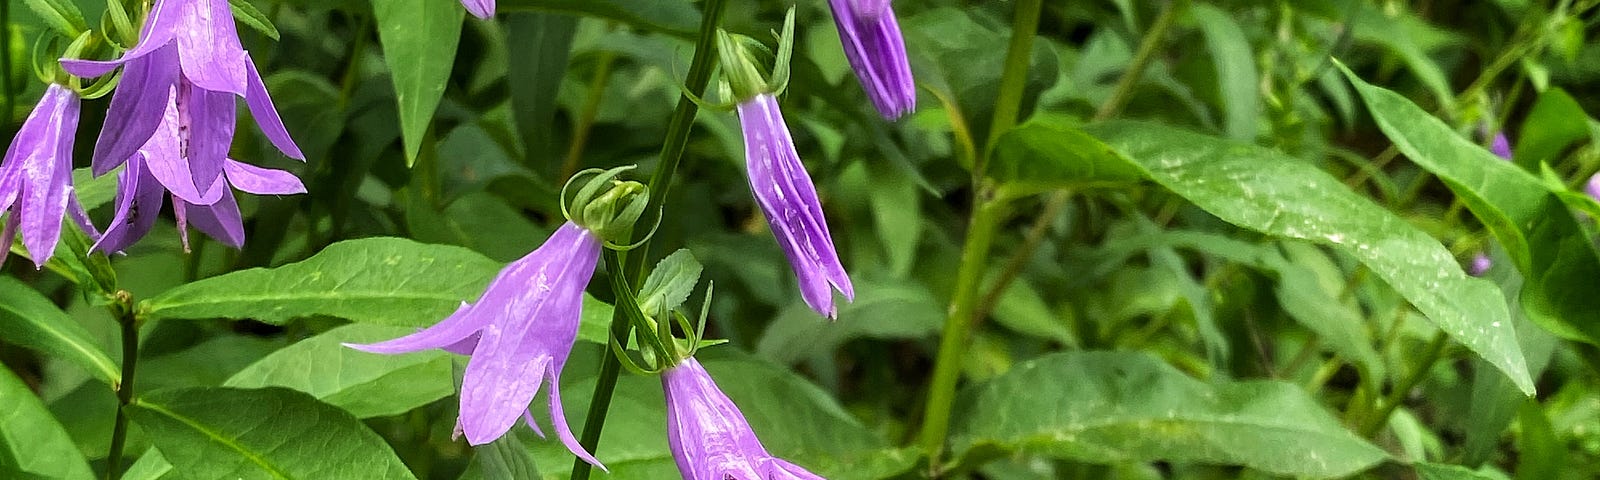 A bee hovers at the edge of a purple bellflower in a lush green garden.